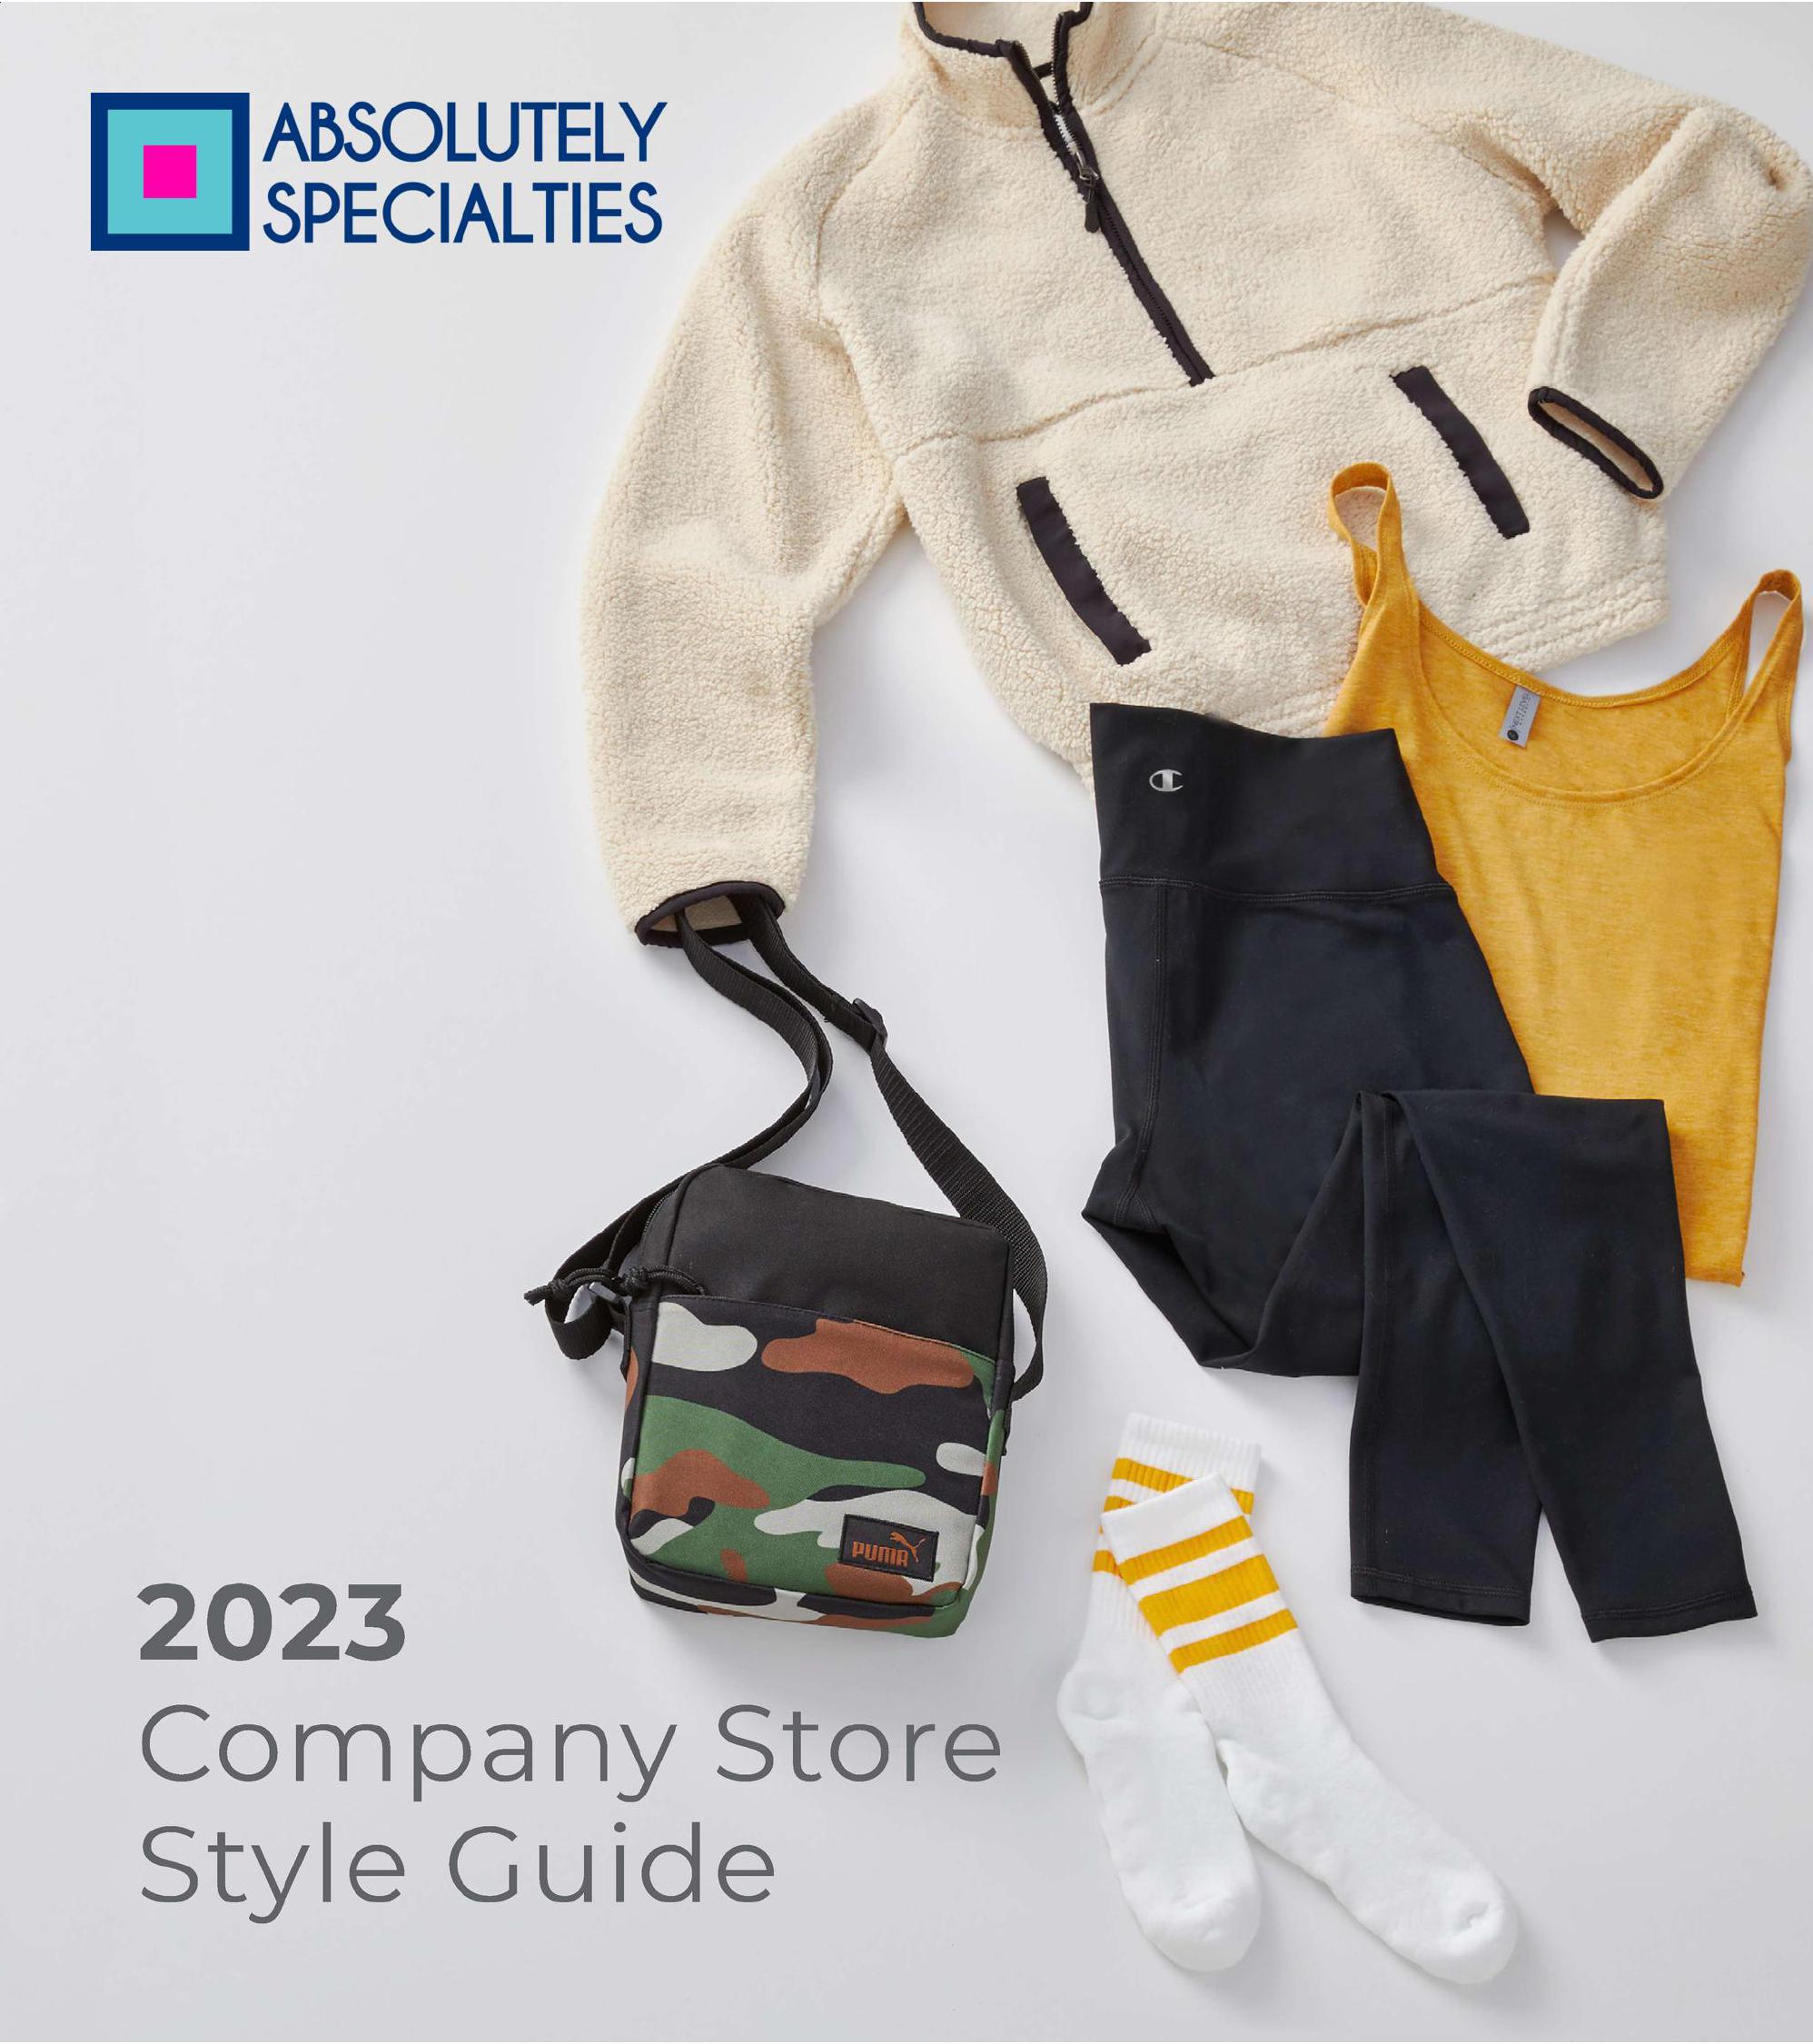 S&S Company Store Style Guide